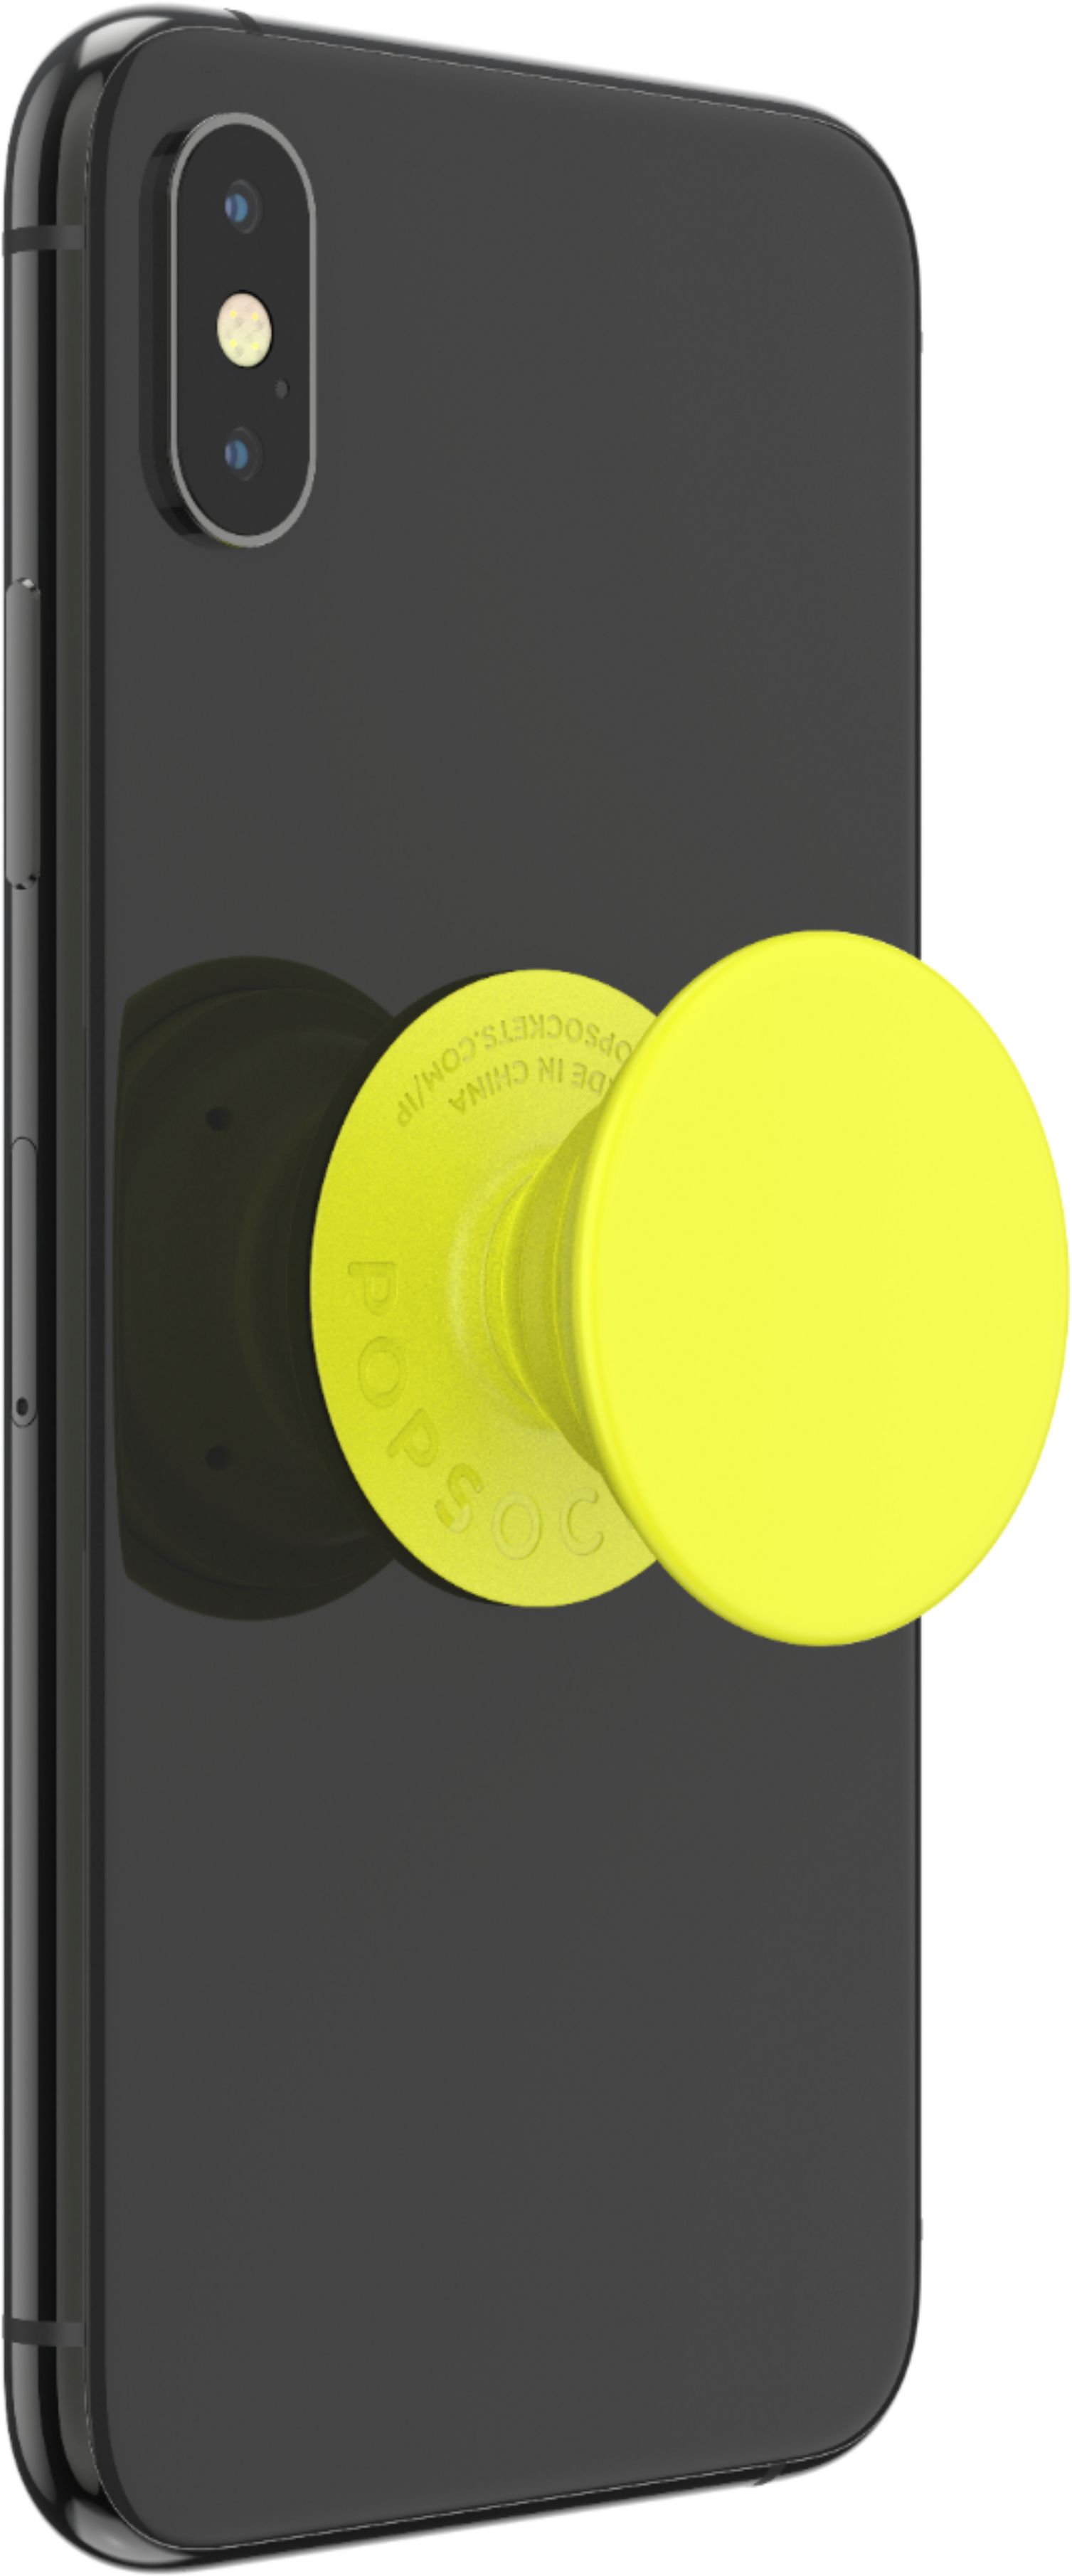 Neon Green Pop Socket Fluorescent Uv Light Phone Charge Case PopSockets  PopGrip: Swappable Grip for …See more Neon Green Pop Socket Fluorescent Uv